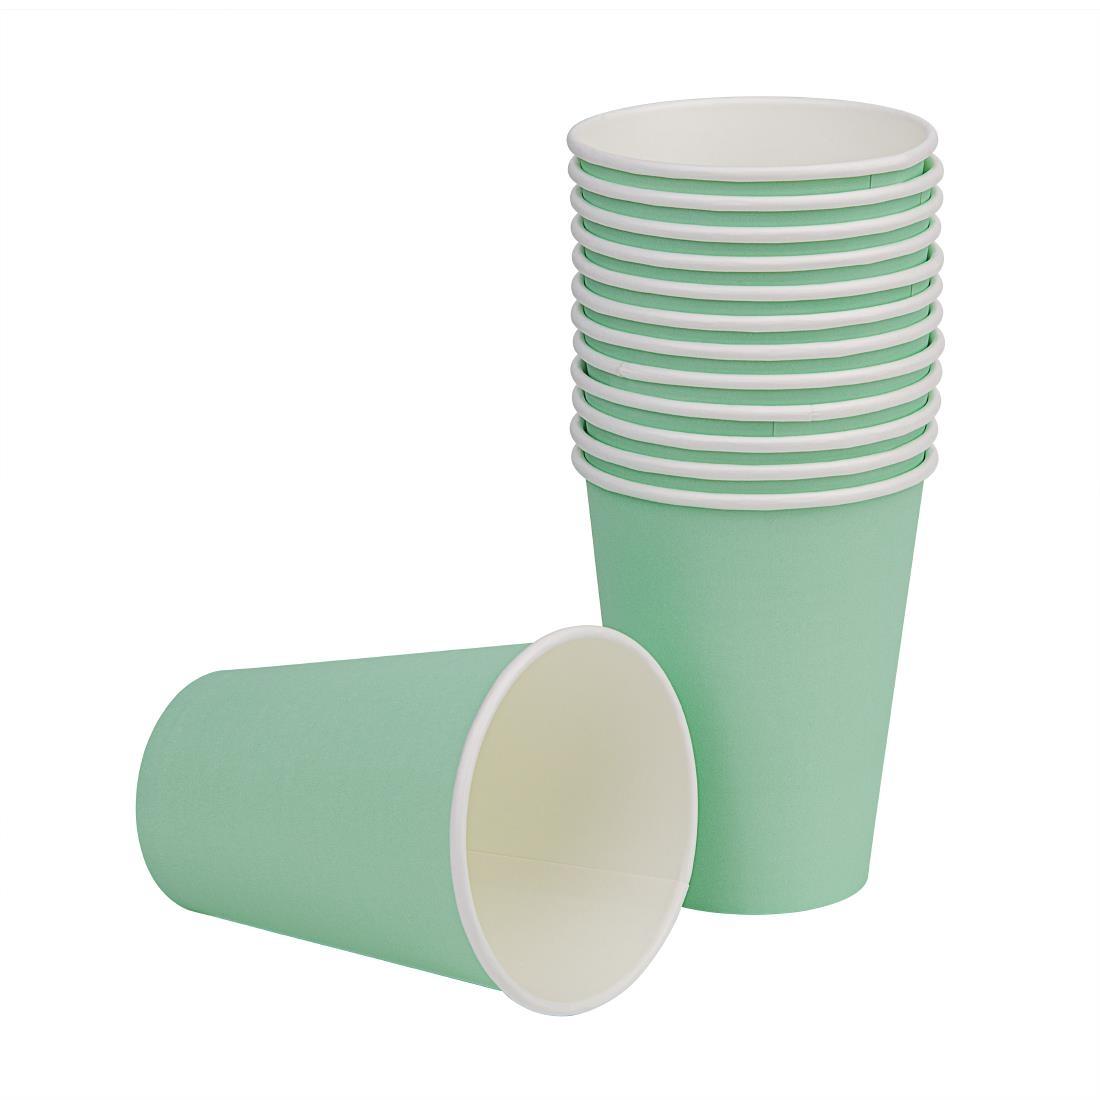 Fiesta Recyclable Single Wall Takeaway Coffee Cups Turquoise 340ml / 12oz (Pack of 50) - GP401  - 2